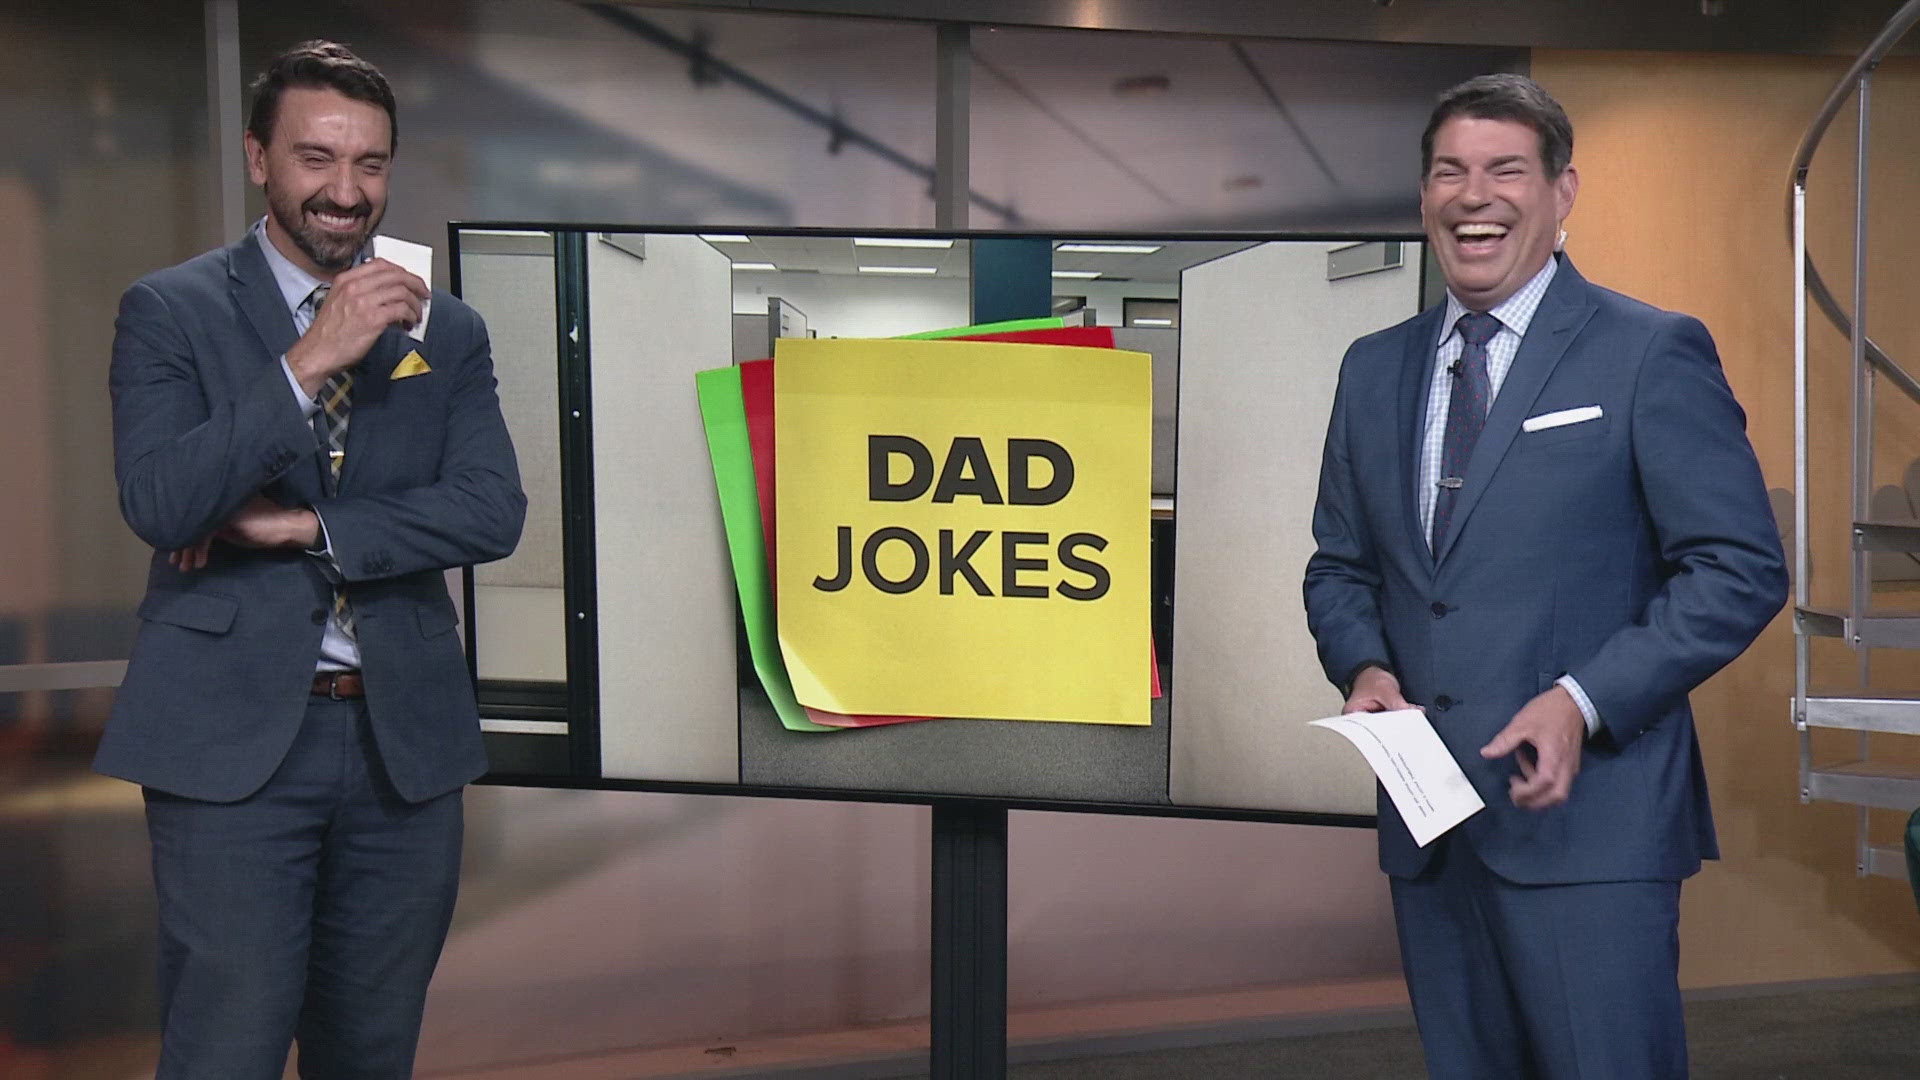 Need a laugh? Here you go! It's time for dad jokes with Matt Wintz and Dave Chudowsky here at WKYC Studios in Cleveland.